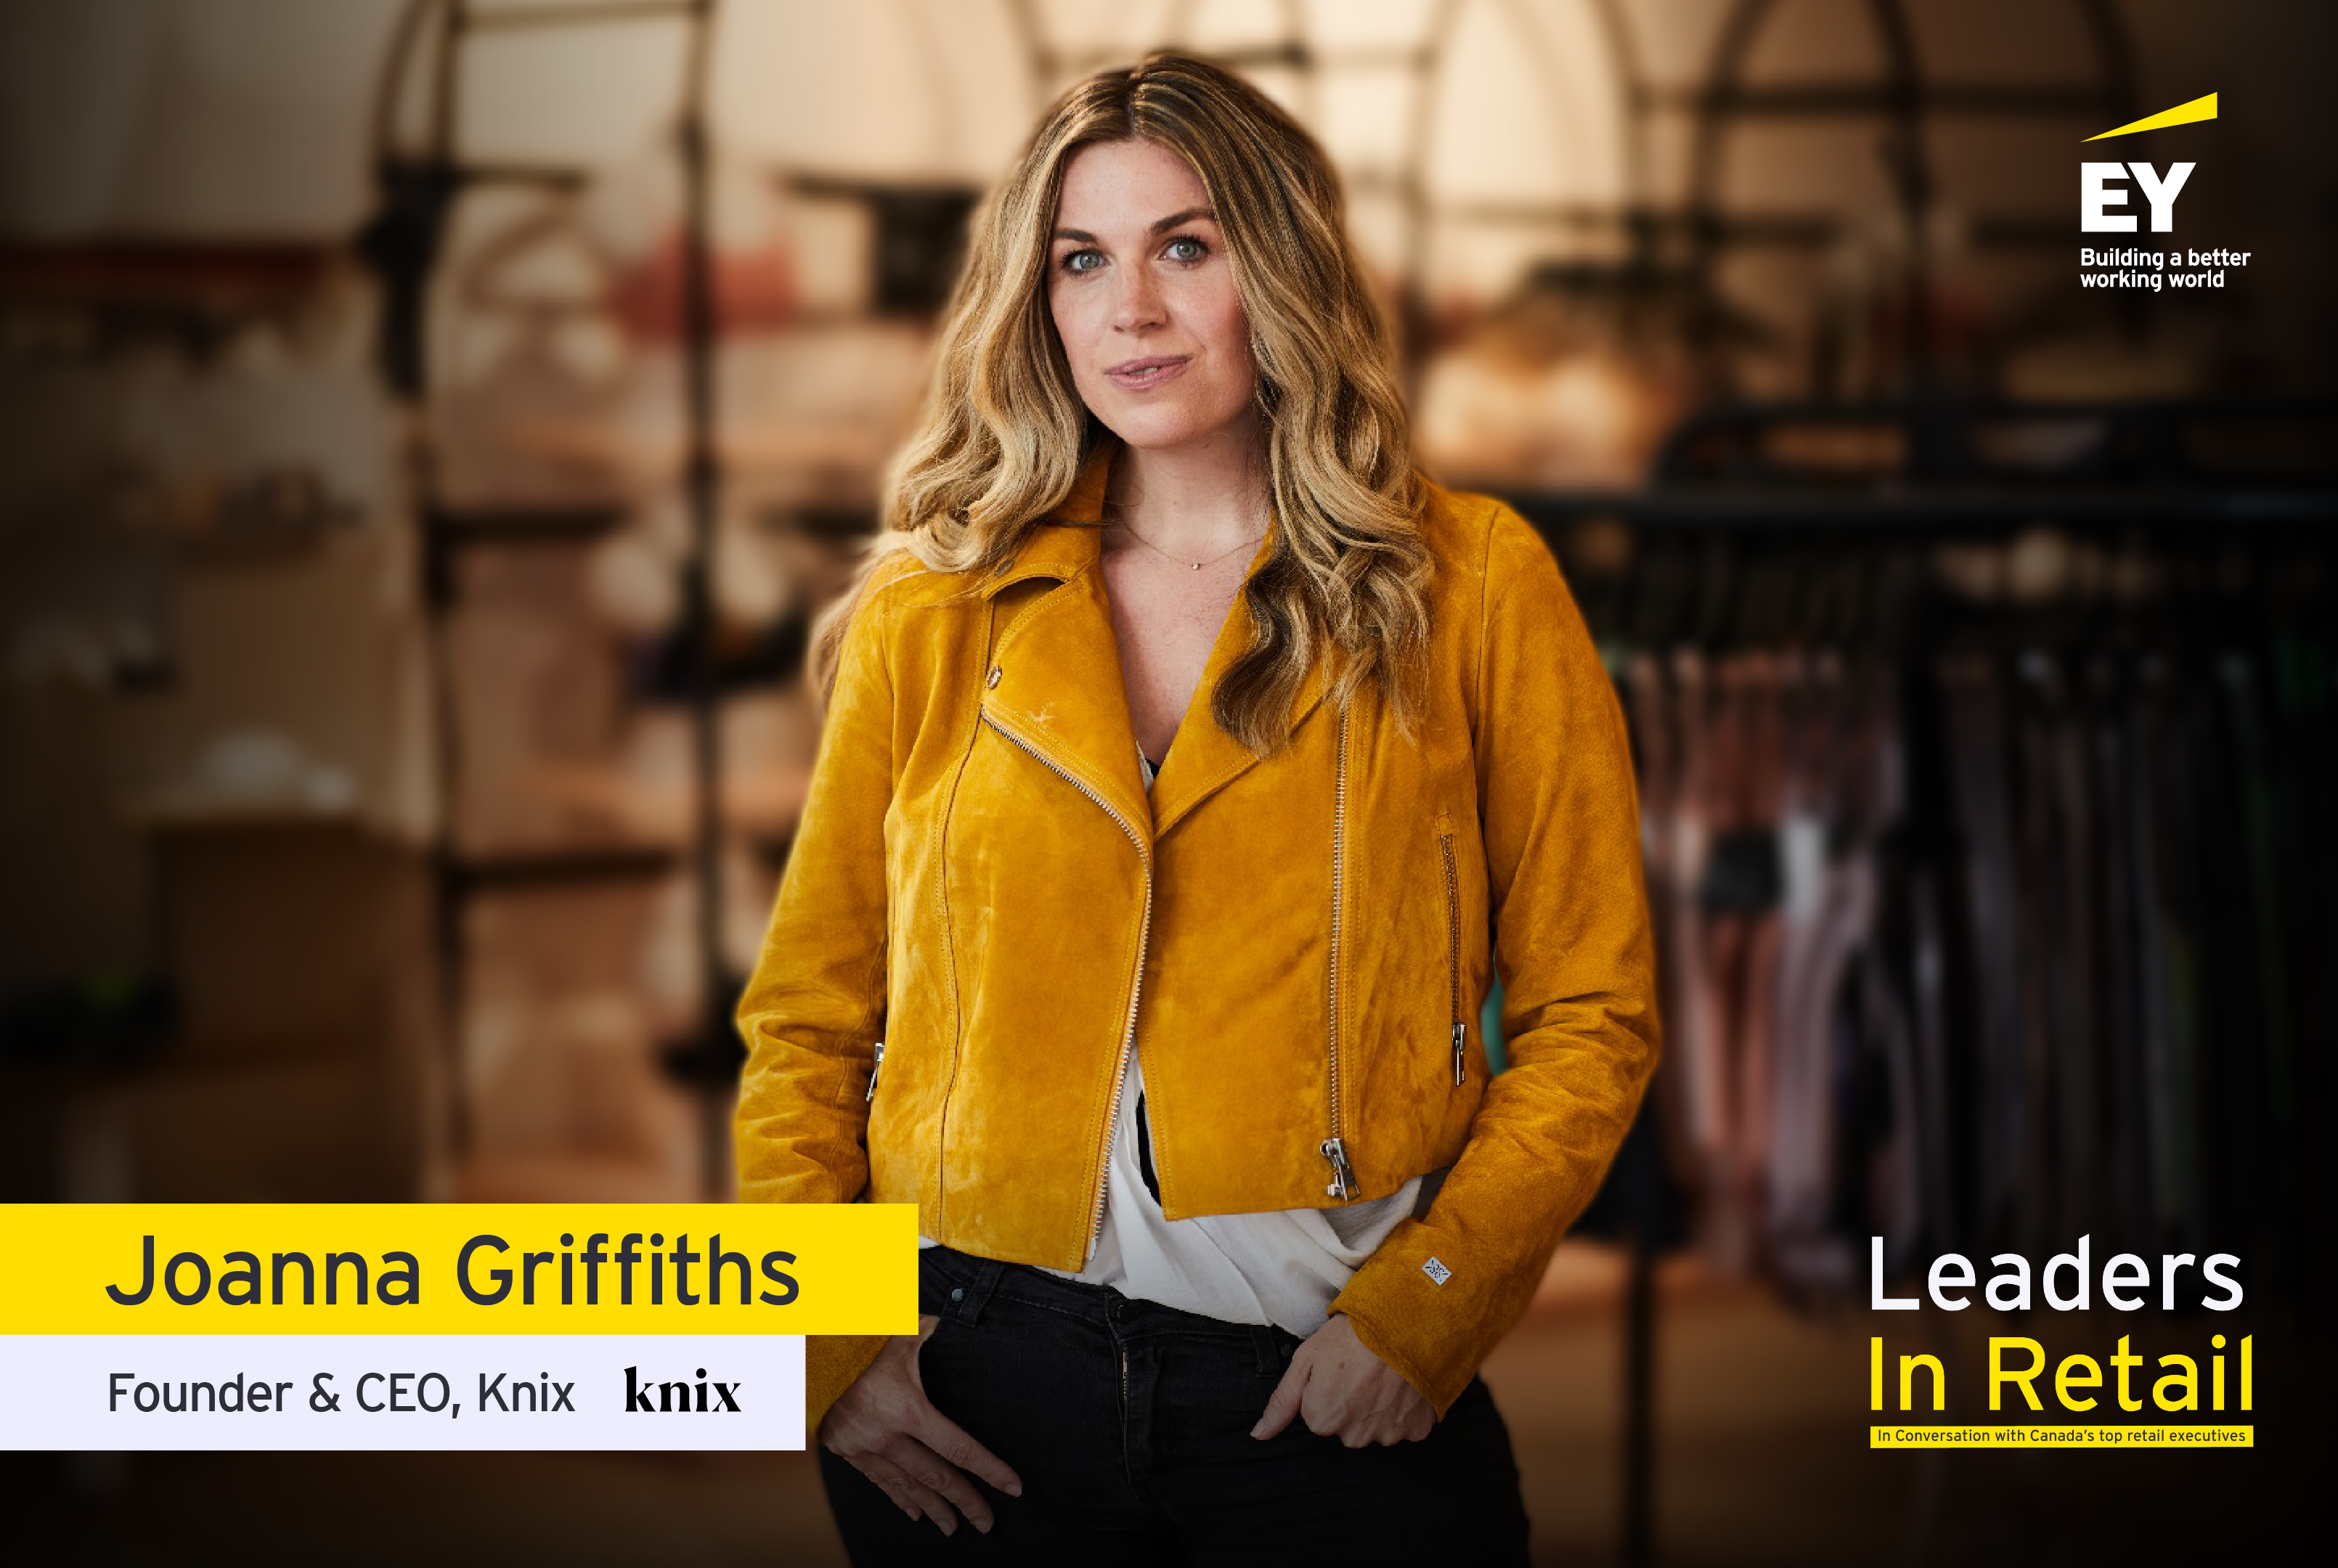 Founder of Knix, Joanna Griffiths is Building a Mission-Driven